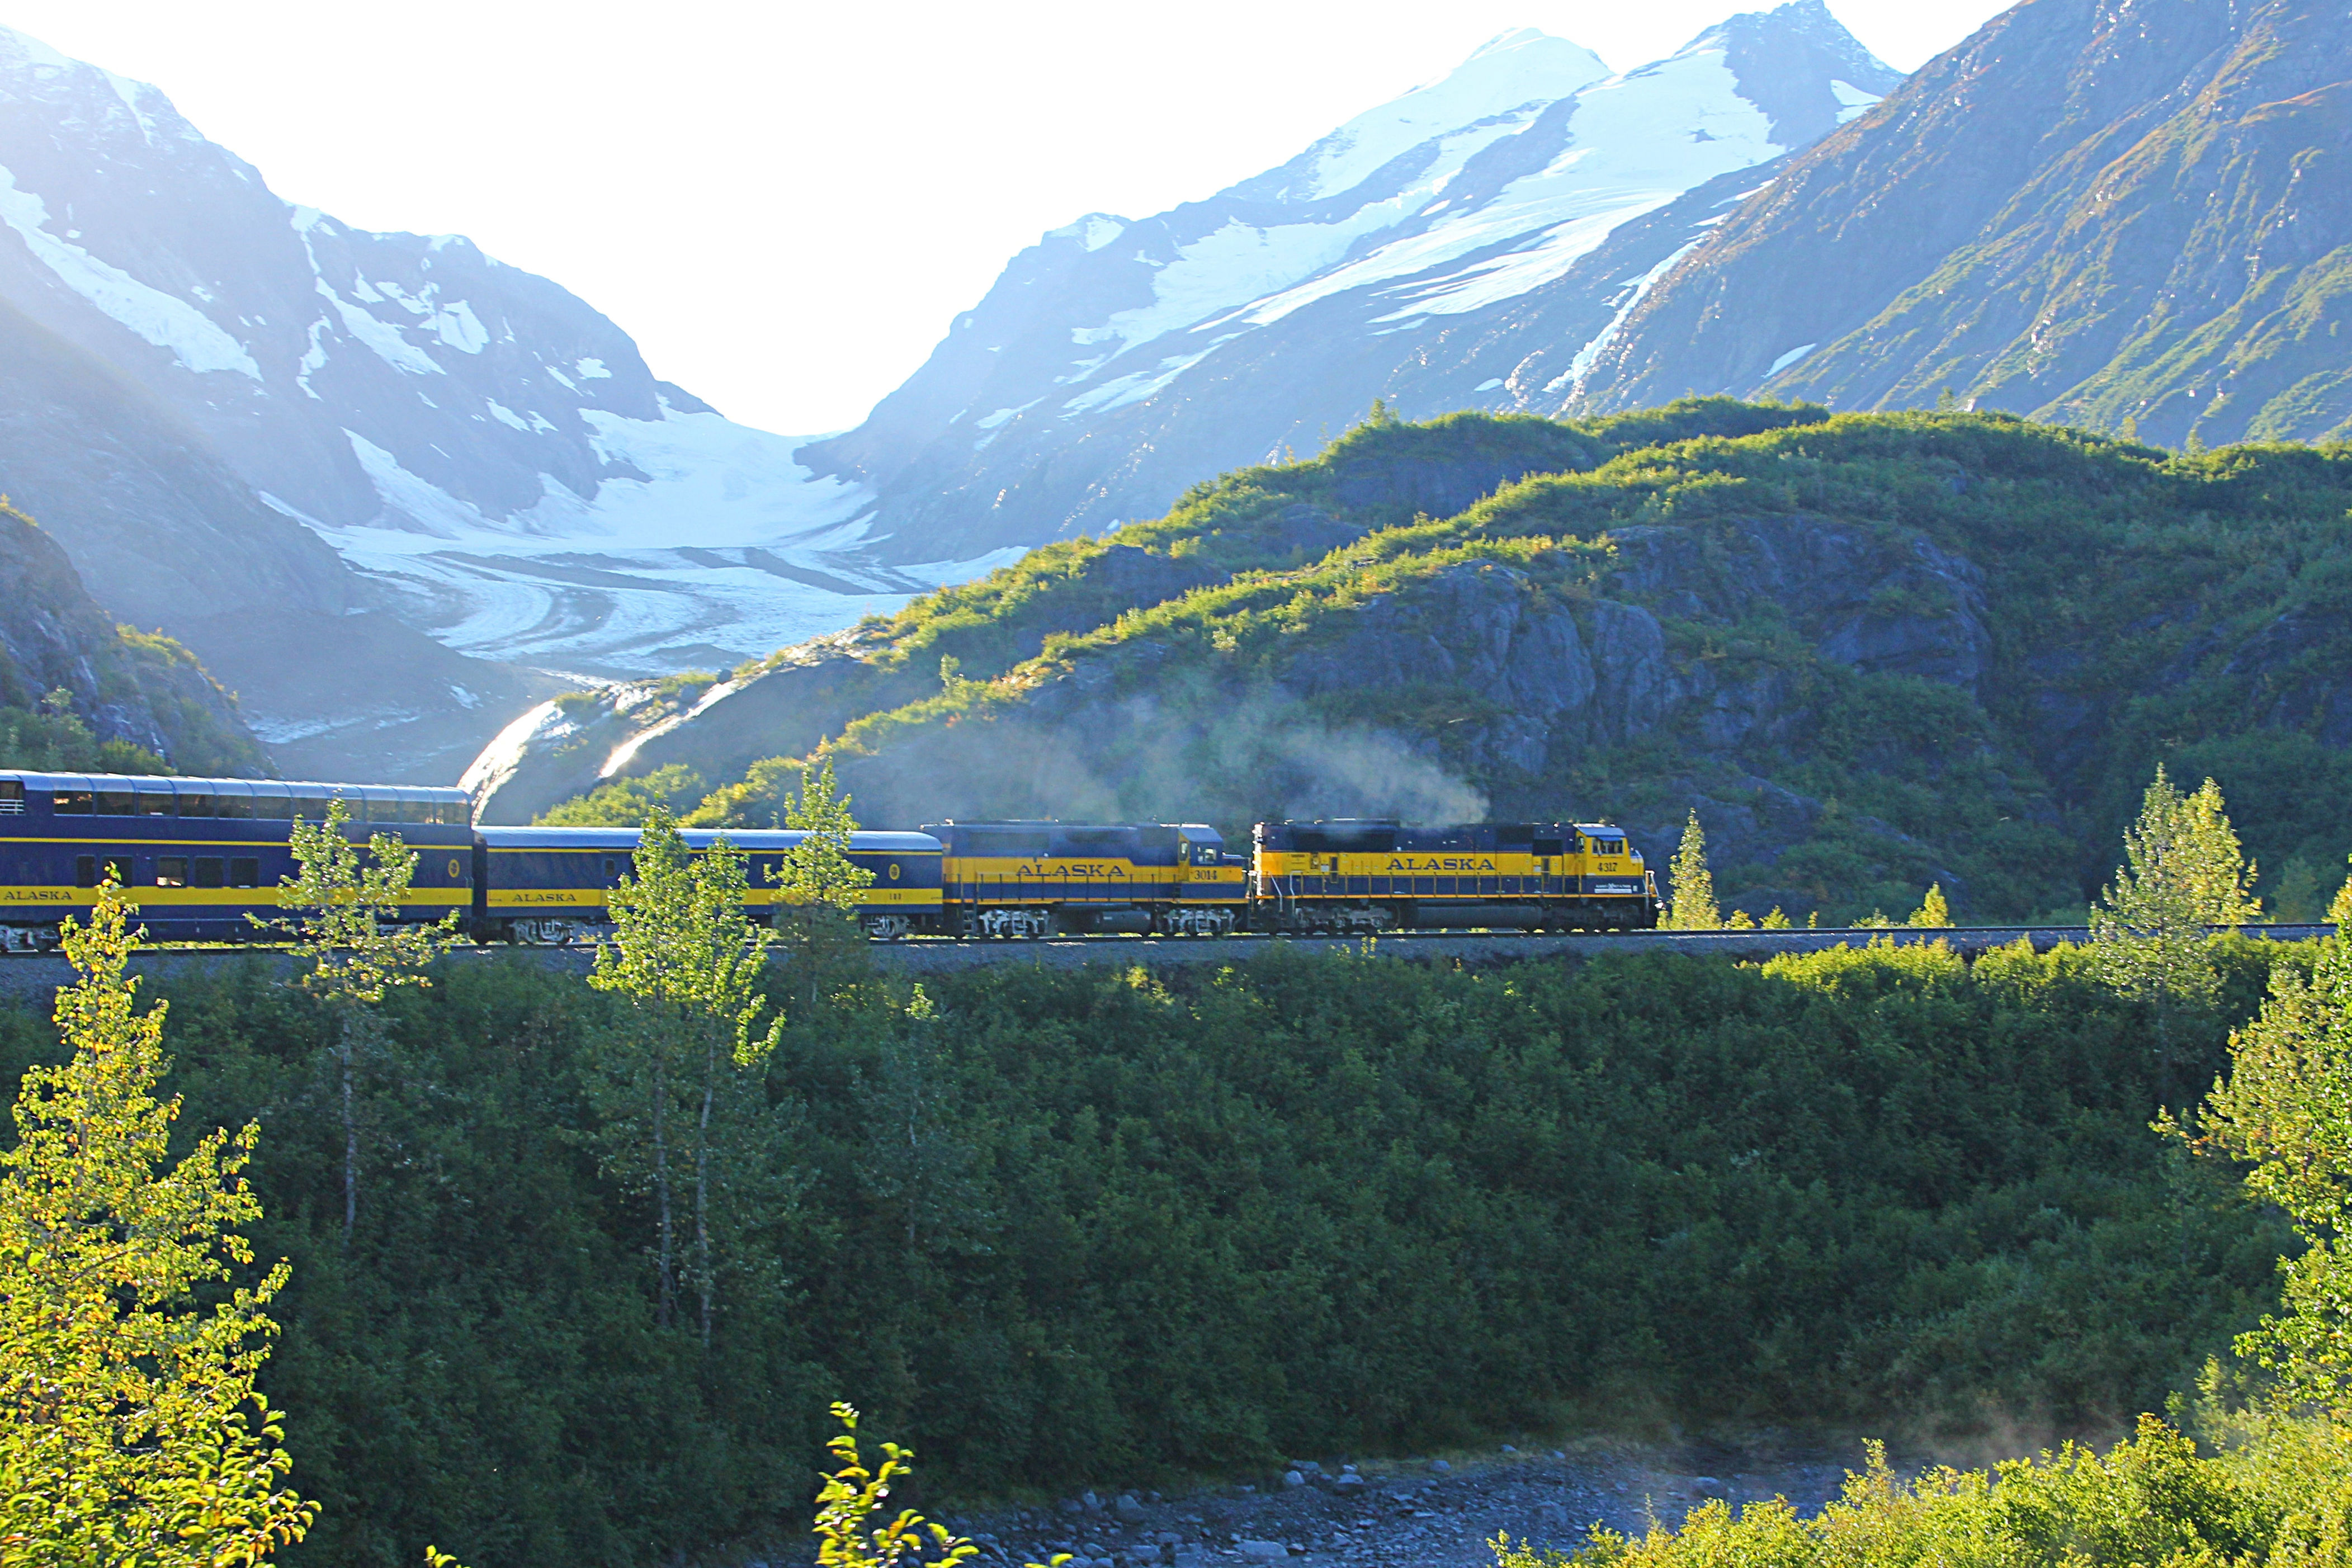 <p>The largest and most wild state in America offers its own photo-worthy railroad adventure: The Coastal Classic, a four-hour excursion from <a href="https://www.cntraveler.com/story/where-to-eat-stay-and-play-in-anchorage?mbid=synd_msn_rss&utm_source=msn&utm_medium=syndication">Anchorage</a> heads south around the Turnagain Arm waterway. The train route weaves into the backwoods of the Kenai Peninsula, through which attentive passengers will spot natural wonders like waterfalls and glaciers before arriving at the port city of Seward, on Resurrection Bay.</p> <p><a href="https://www.alaskarailroad.com/ride-a-train/buy-tickets">Tickets from $96</a></p><p>Sign up to receive the latest news, expert tips, and inspiration on all things travel</p><a href="https://www.cntraveler.com/newsletter/the-daily?sourceCode=msnsend">Inspire Me</a>